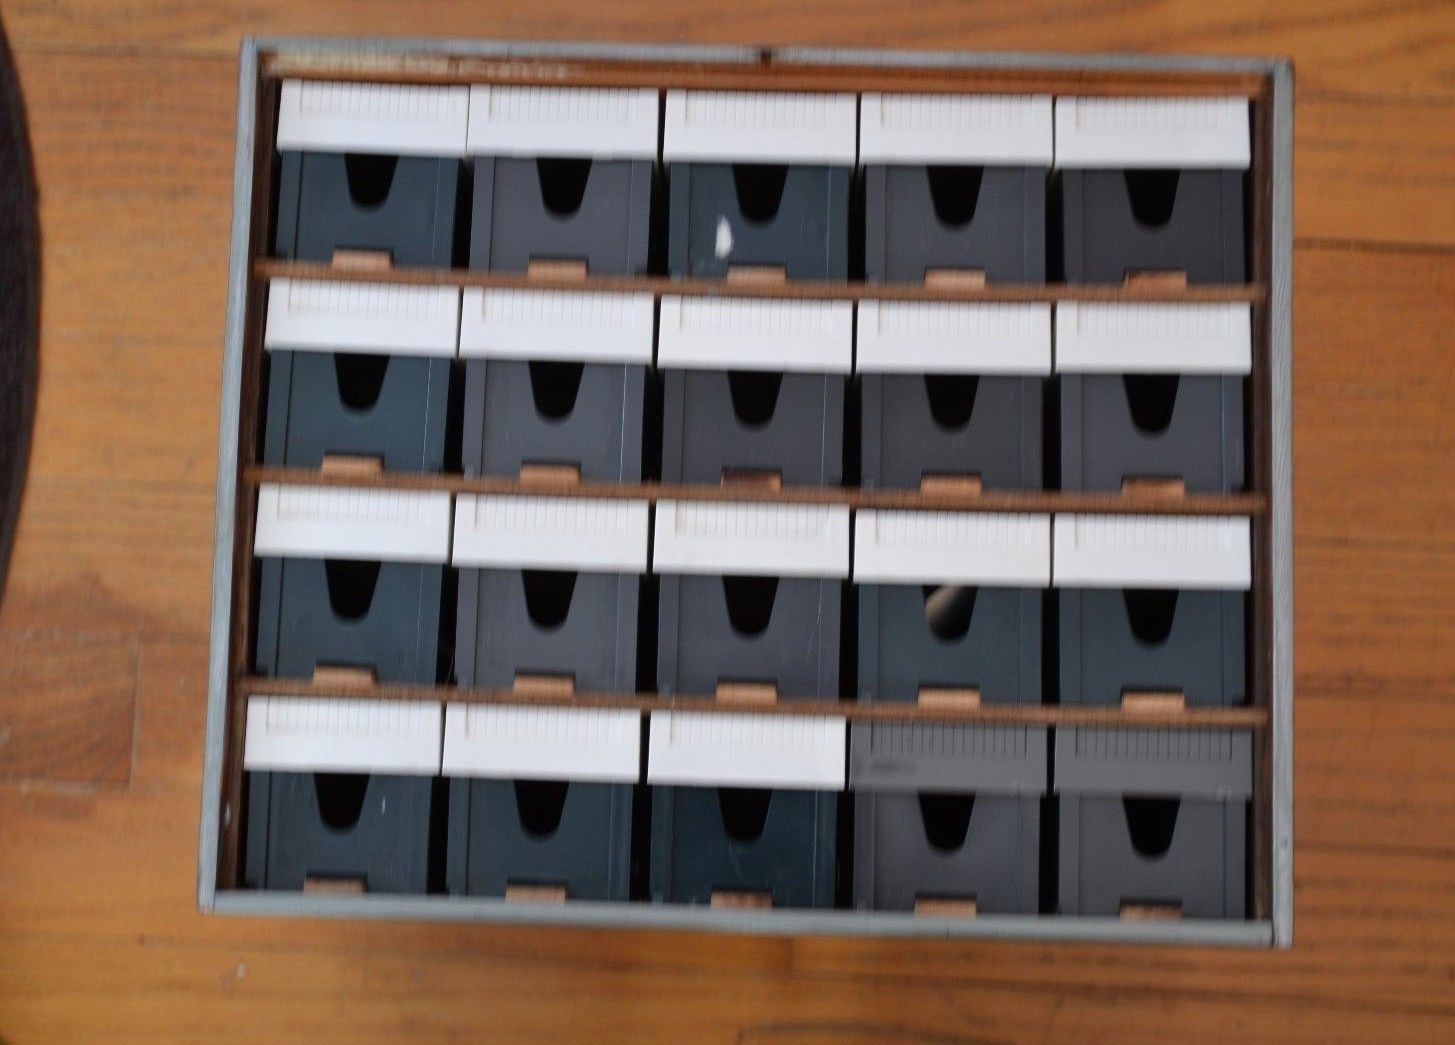 20-Bell & Howell Micro-Fit slide trays in Wood Handmade Storage Box - $44.54